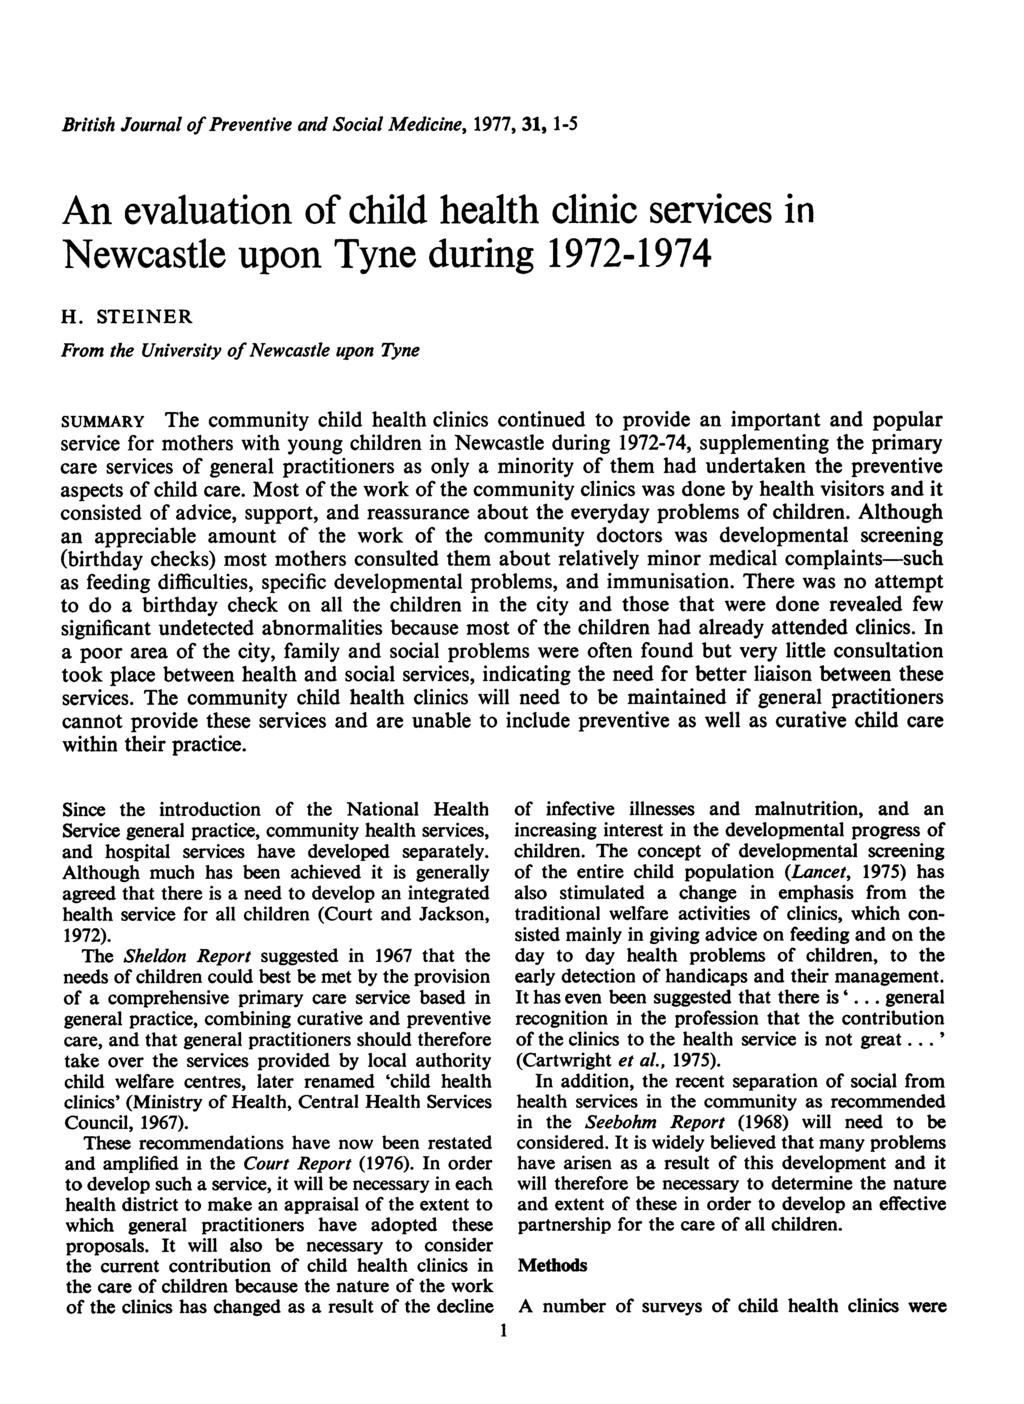 British Journal of Preventive and Social Medicine, 1977, 31, 1-5 An evaluation of child health clinic services in Newcastle upon Tyne during 1972-1974 H.